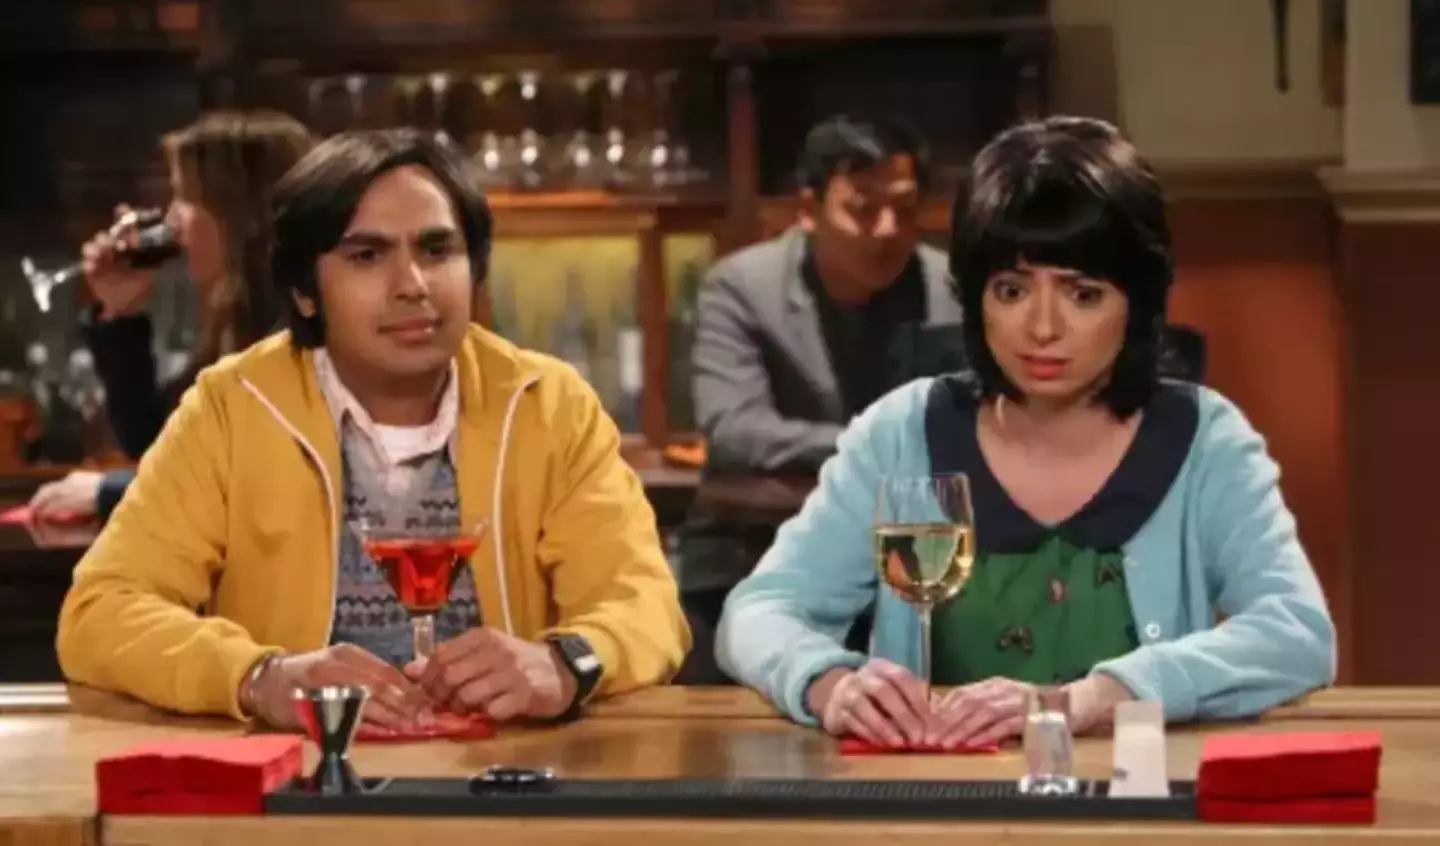 The actress starred as Lucy in The Big Bang Theory.